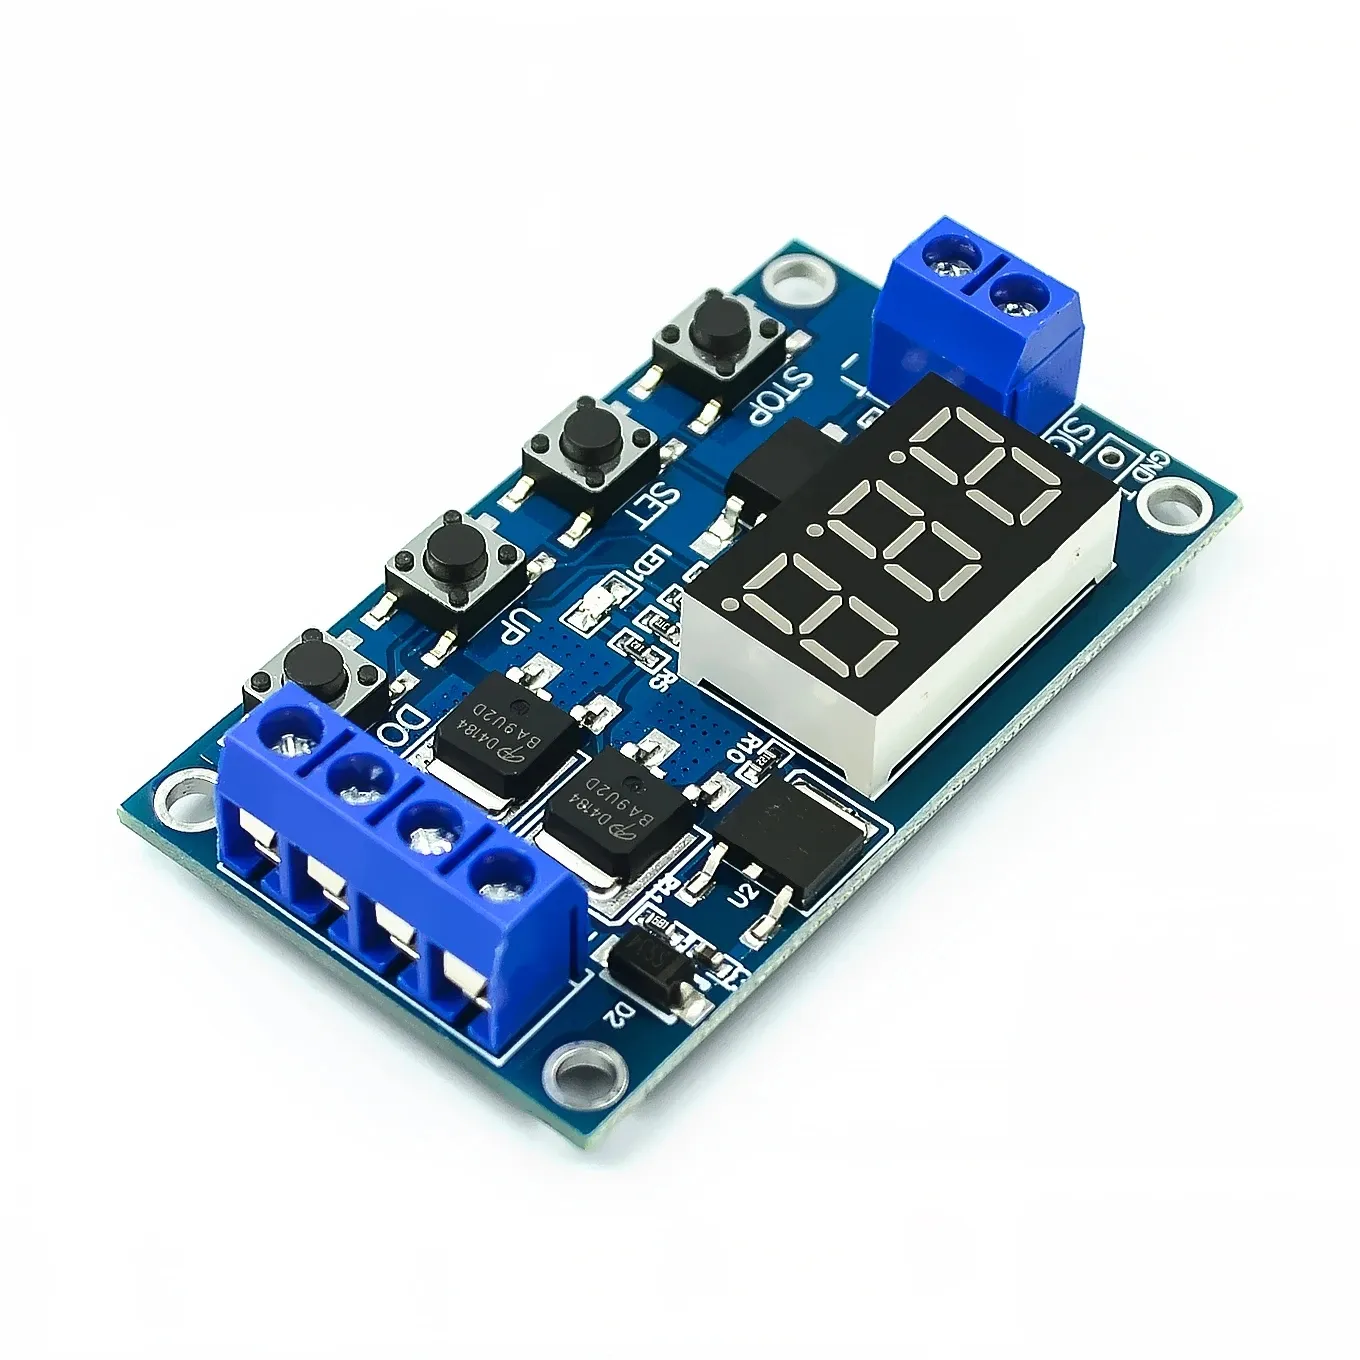 DC 12V 24V Dual MOS LED Digital Time Delay Relay Trigger Cycle Timer Delay Switch Circuit Board Timing Control Module DIY